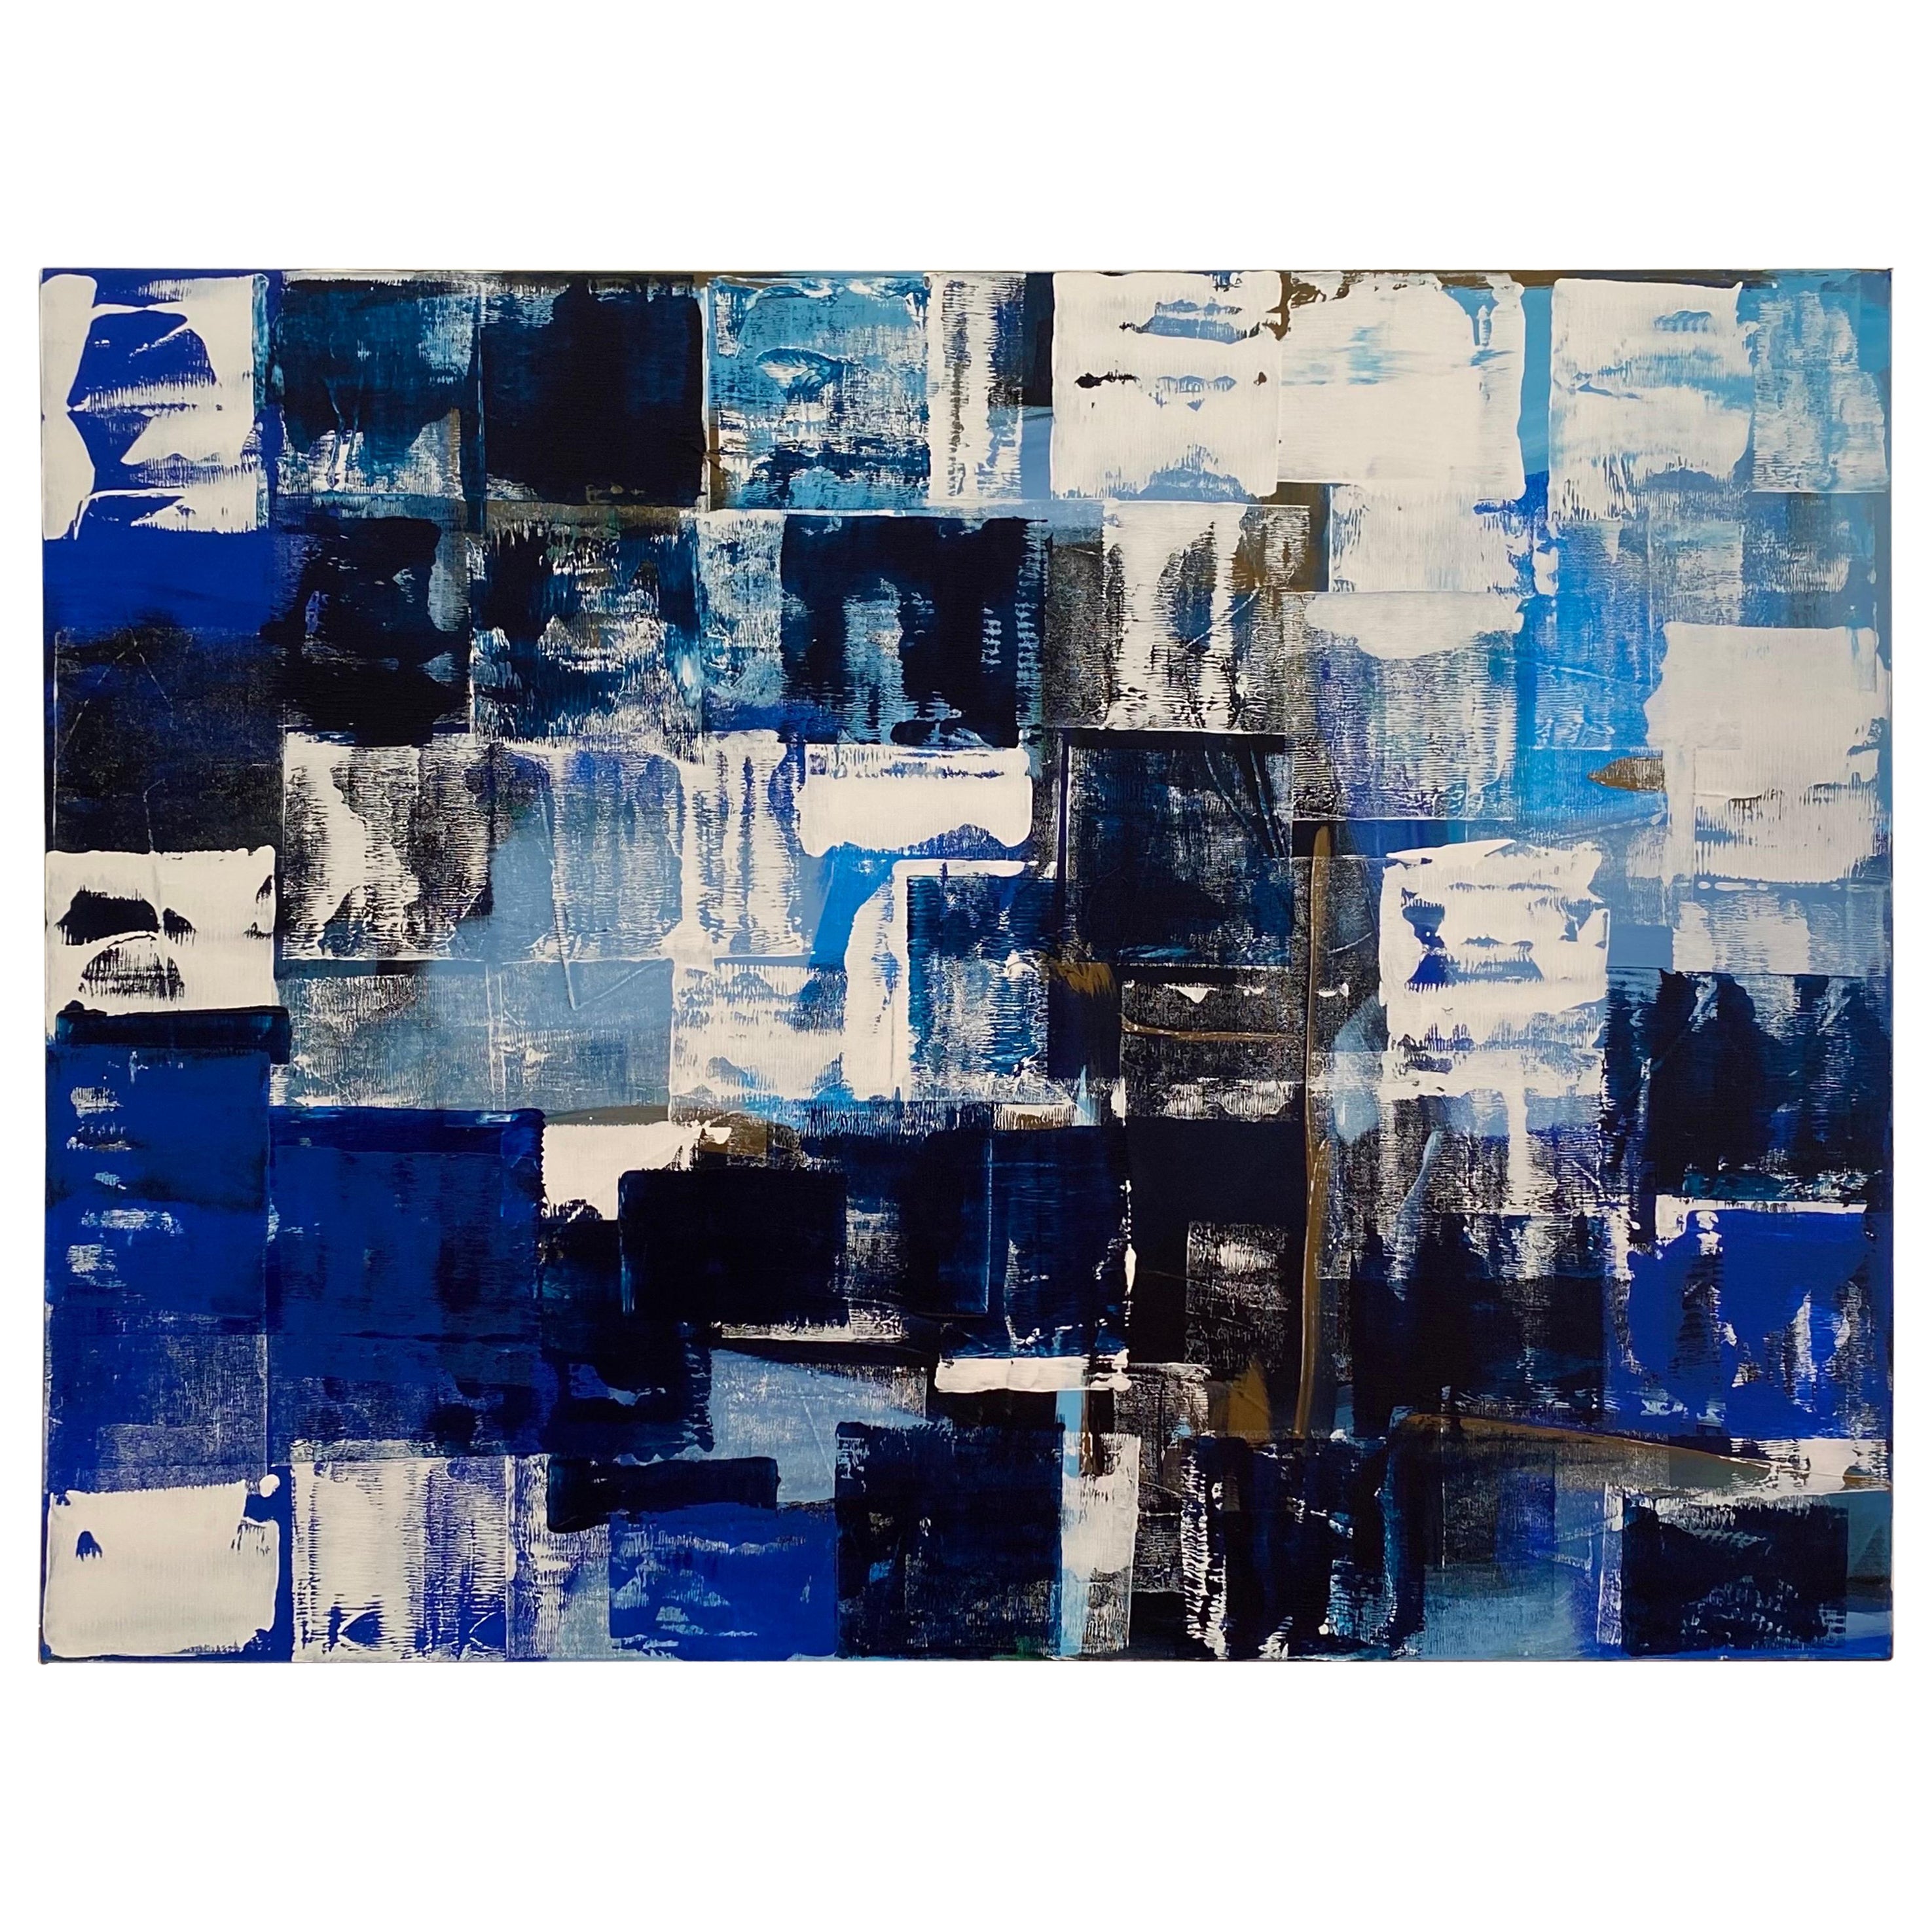 Large Blue Abstract Painting Titled "Mykos" by Rebecca Ruoff, 2021 For Sale